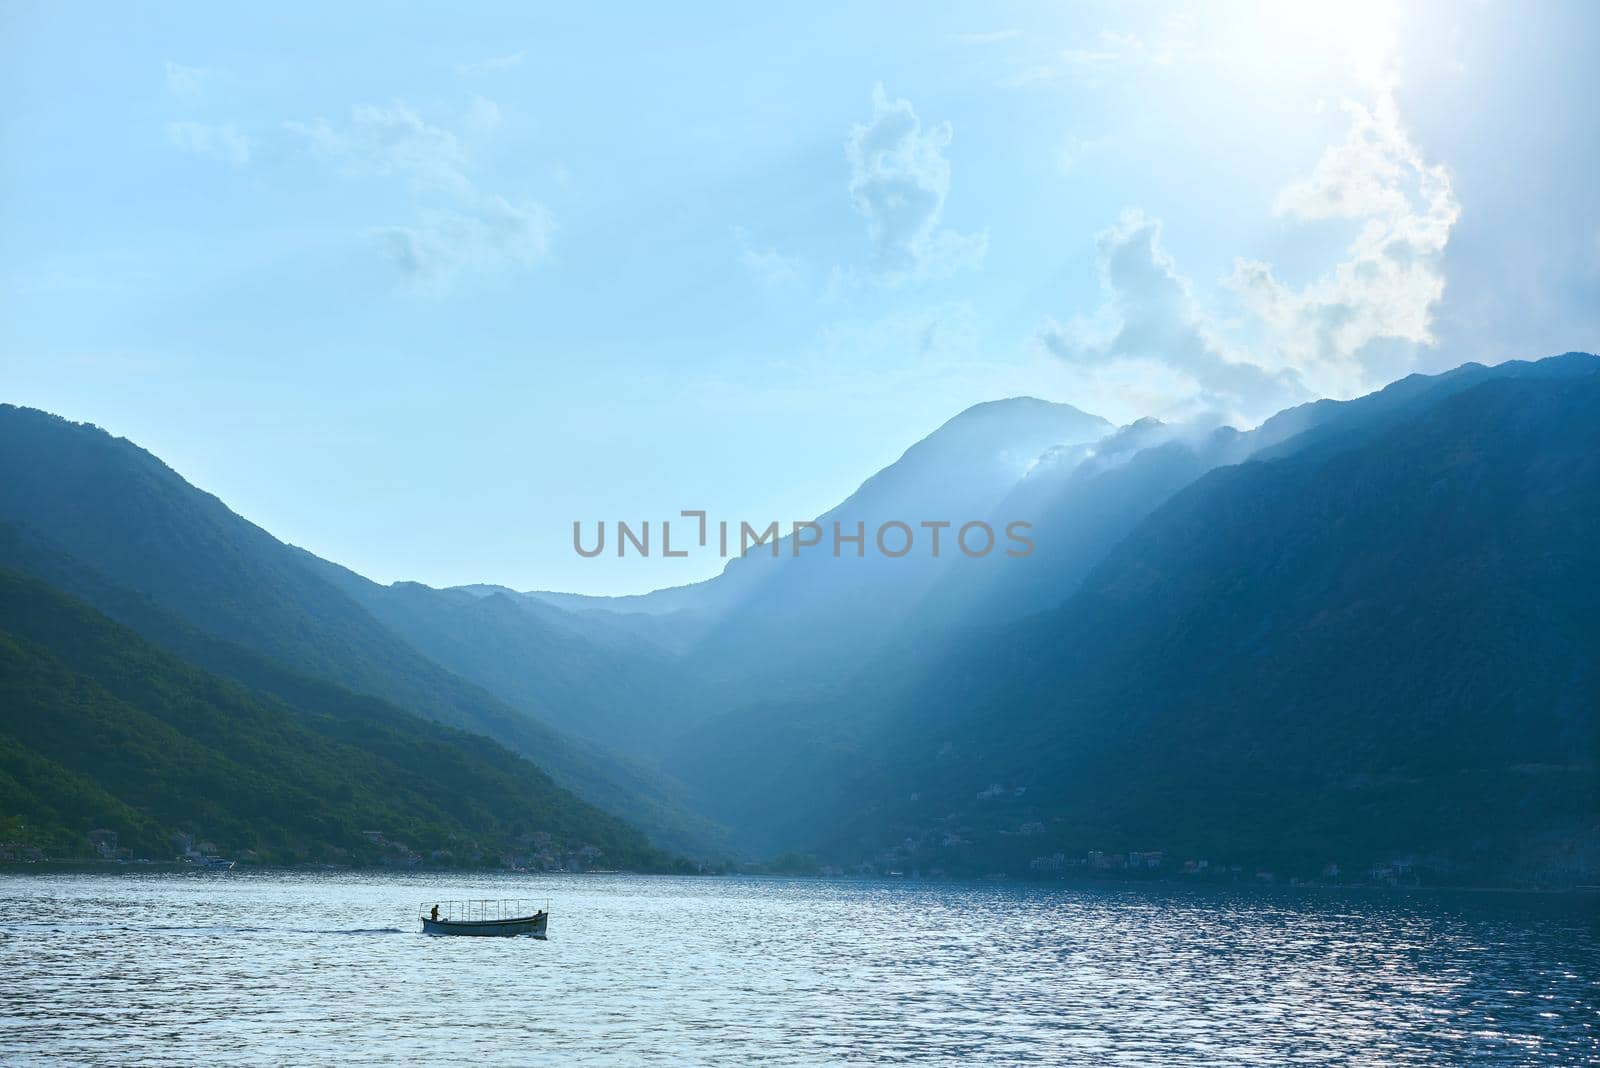 A boat with fishermen floats on the sea against the backdrop of a mountainous landscape in the Adriatic Sea in Montenegro.